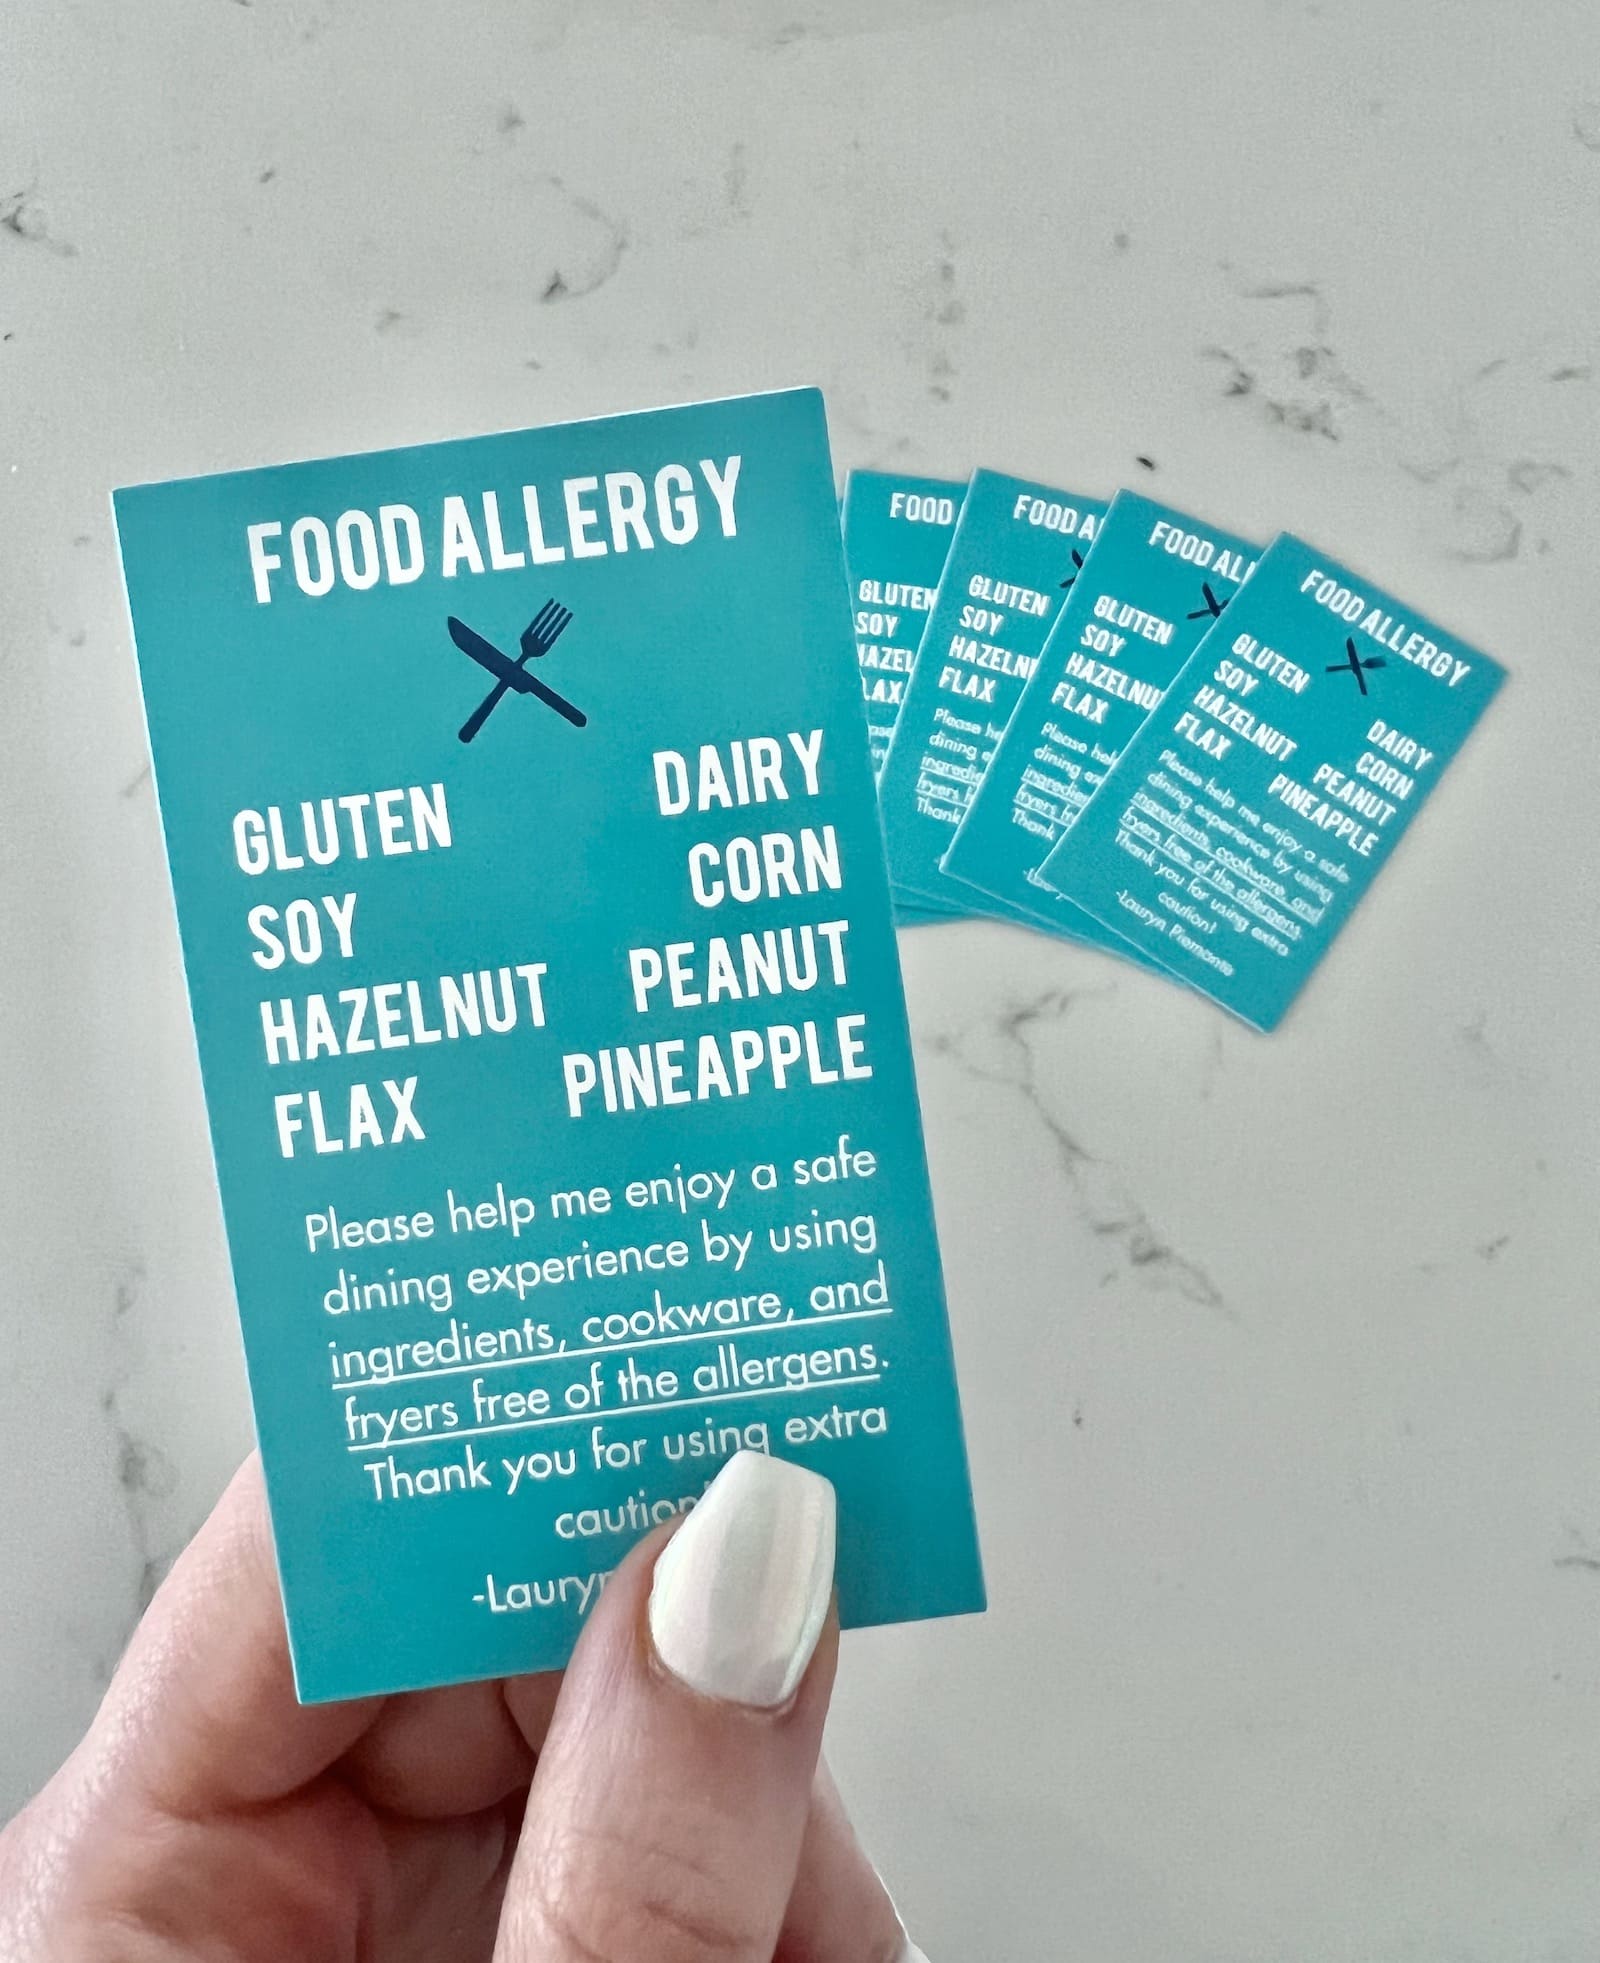 Holding a food allergy card for gluten, dairy, soy, corn, hazelnut, peanut, pineapple, and flax allergies.